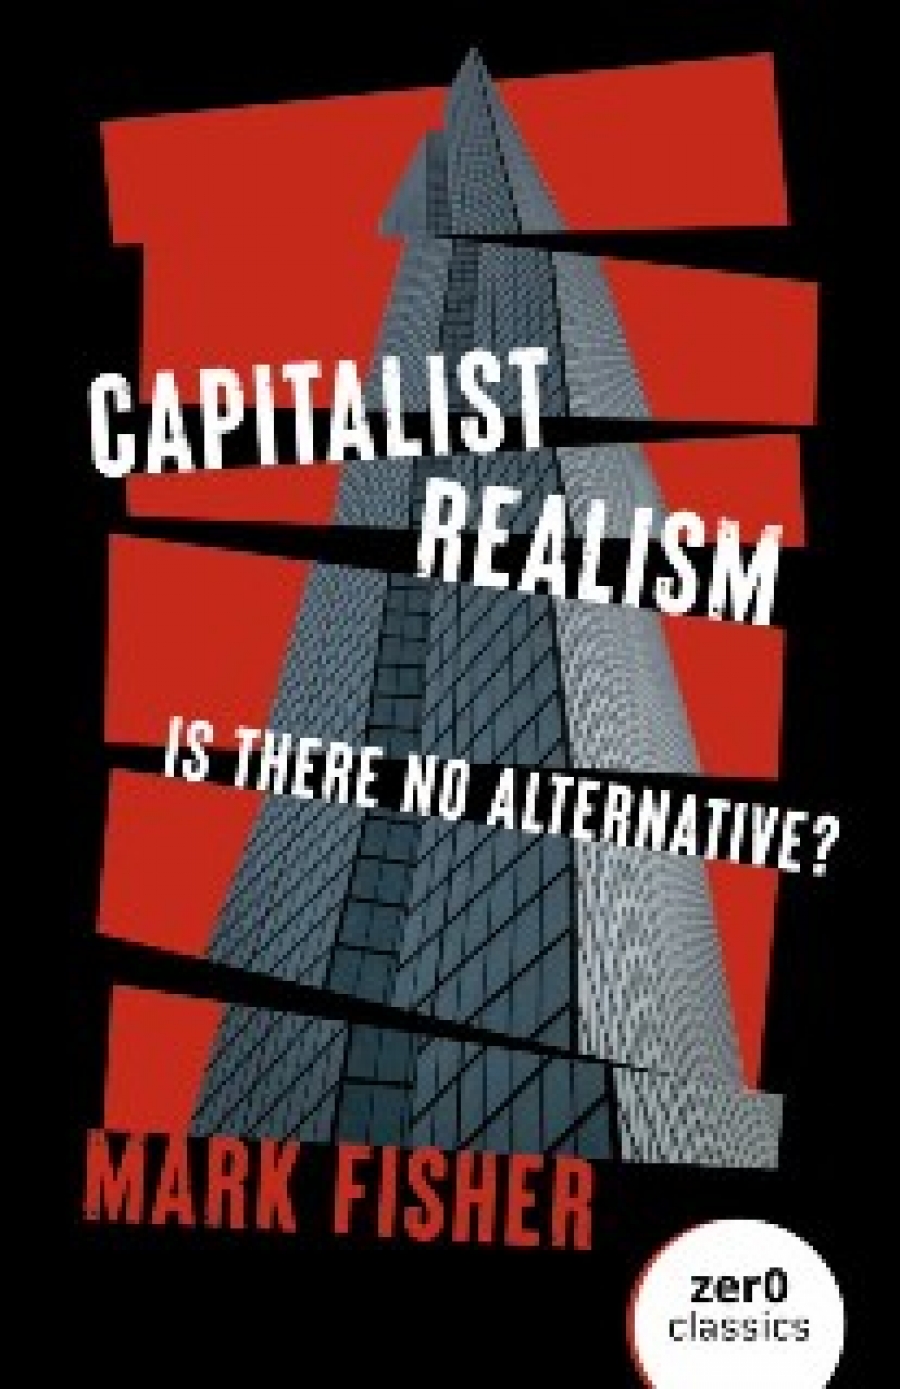 Mark, Fisher Capitalist realism (new edition) - is there no alternative? 